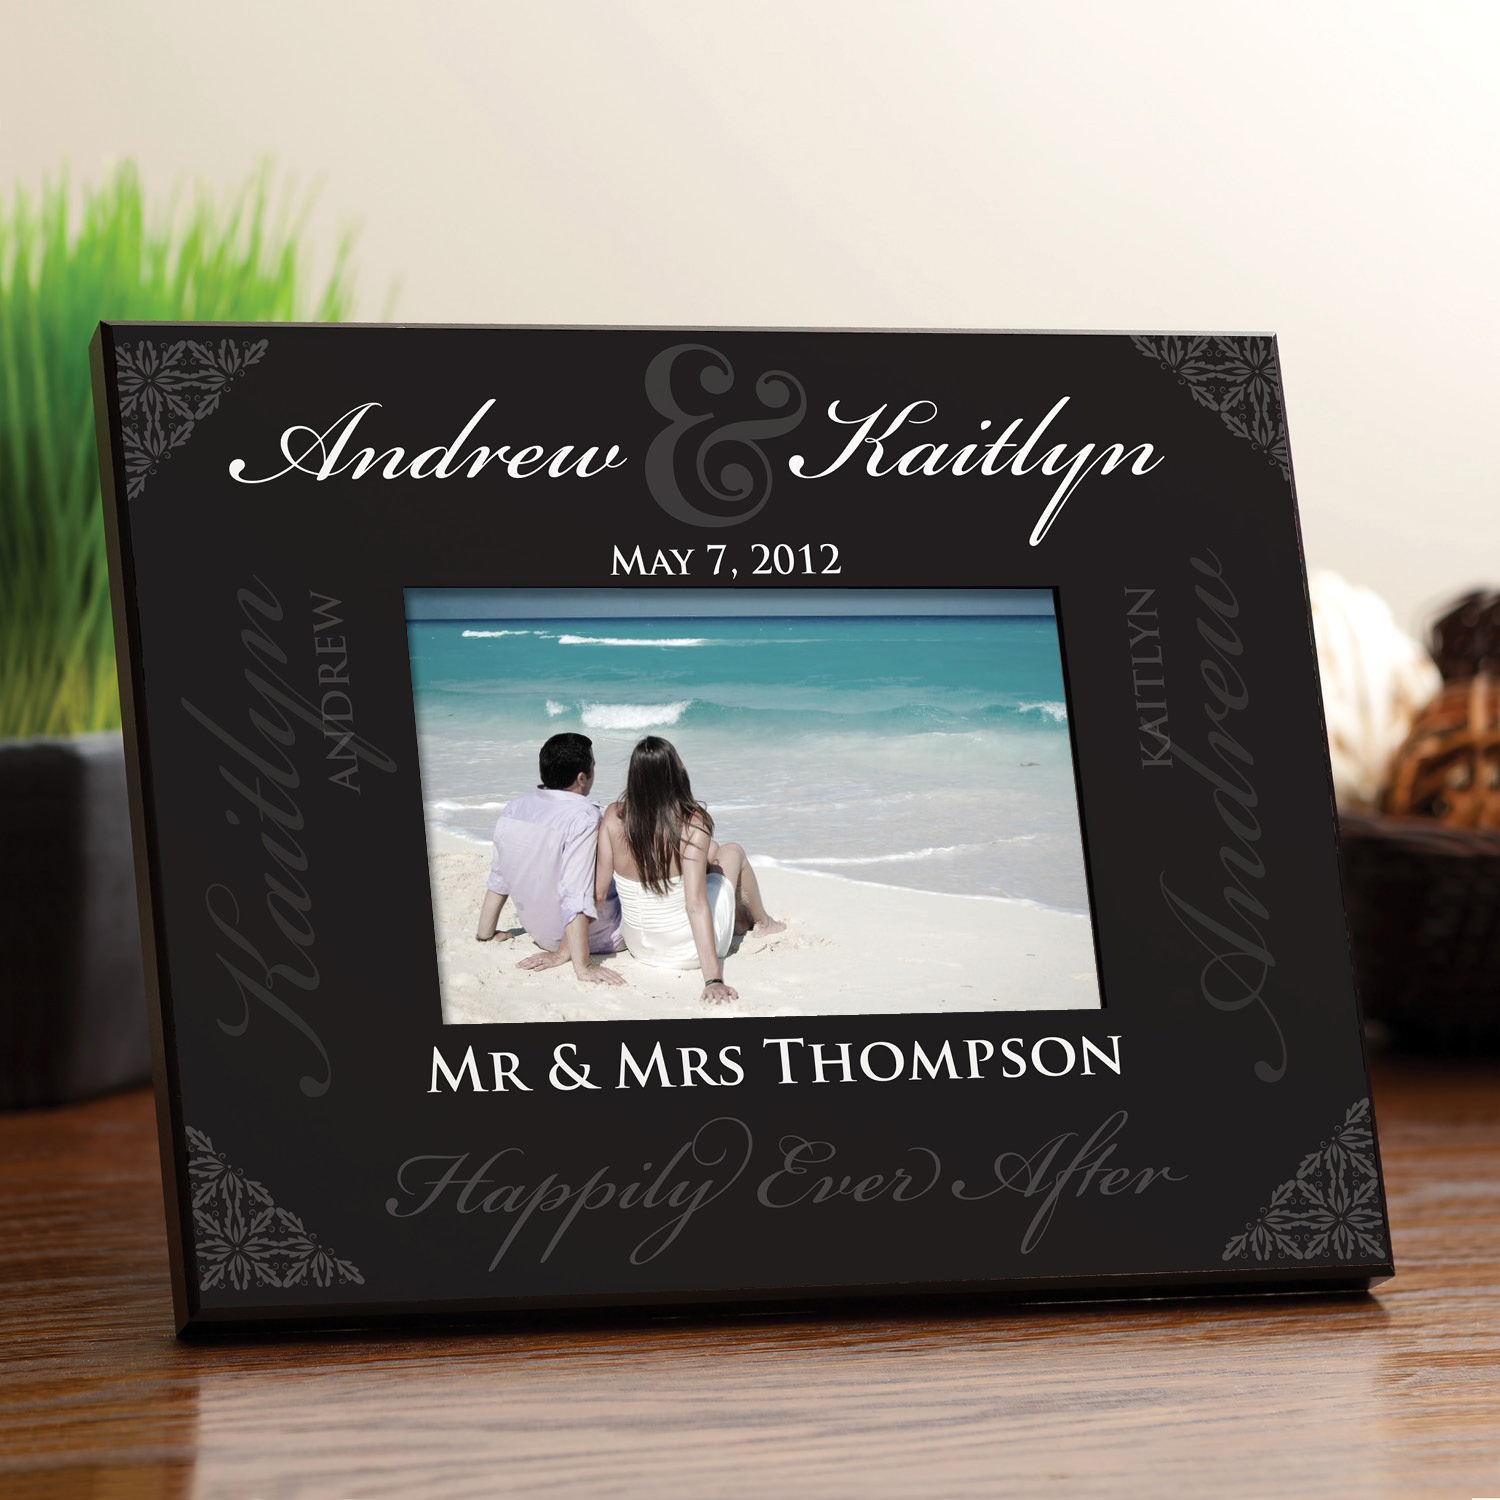 Our Wedding Personalized Frame